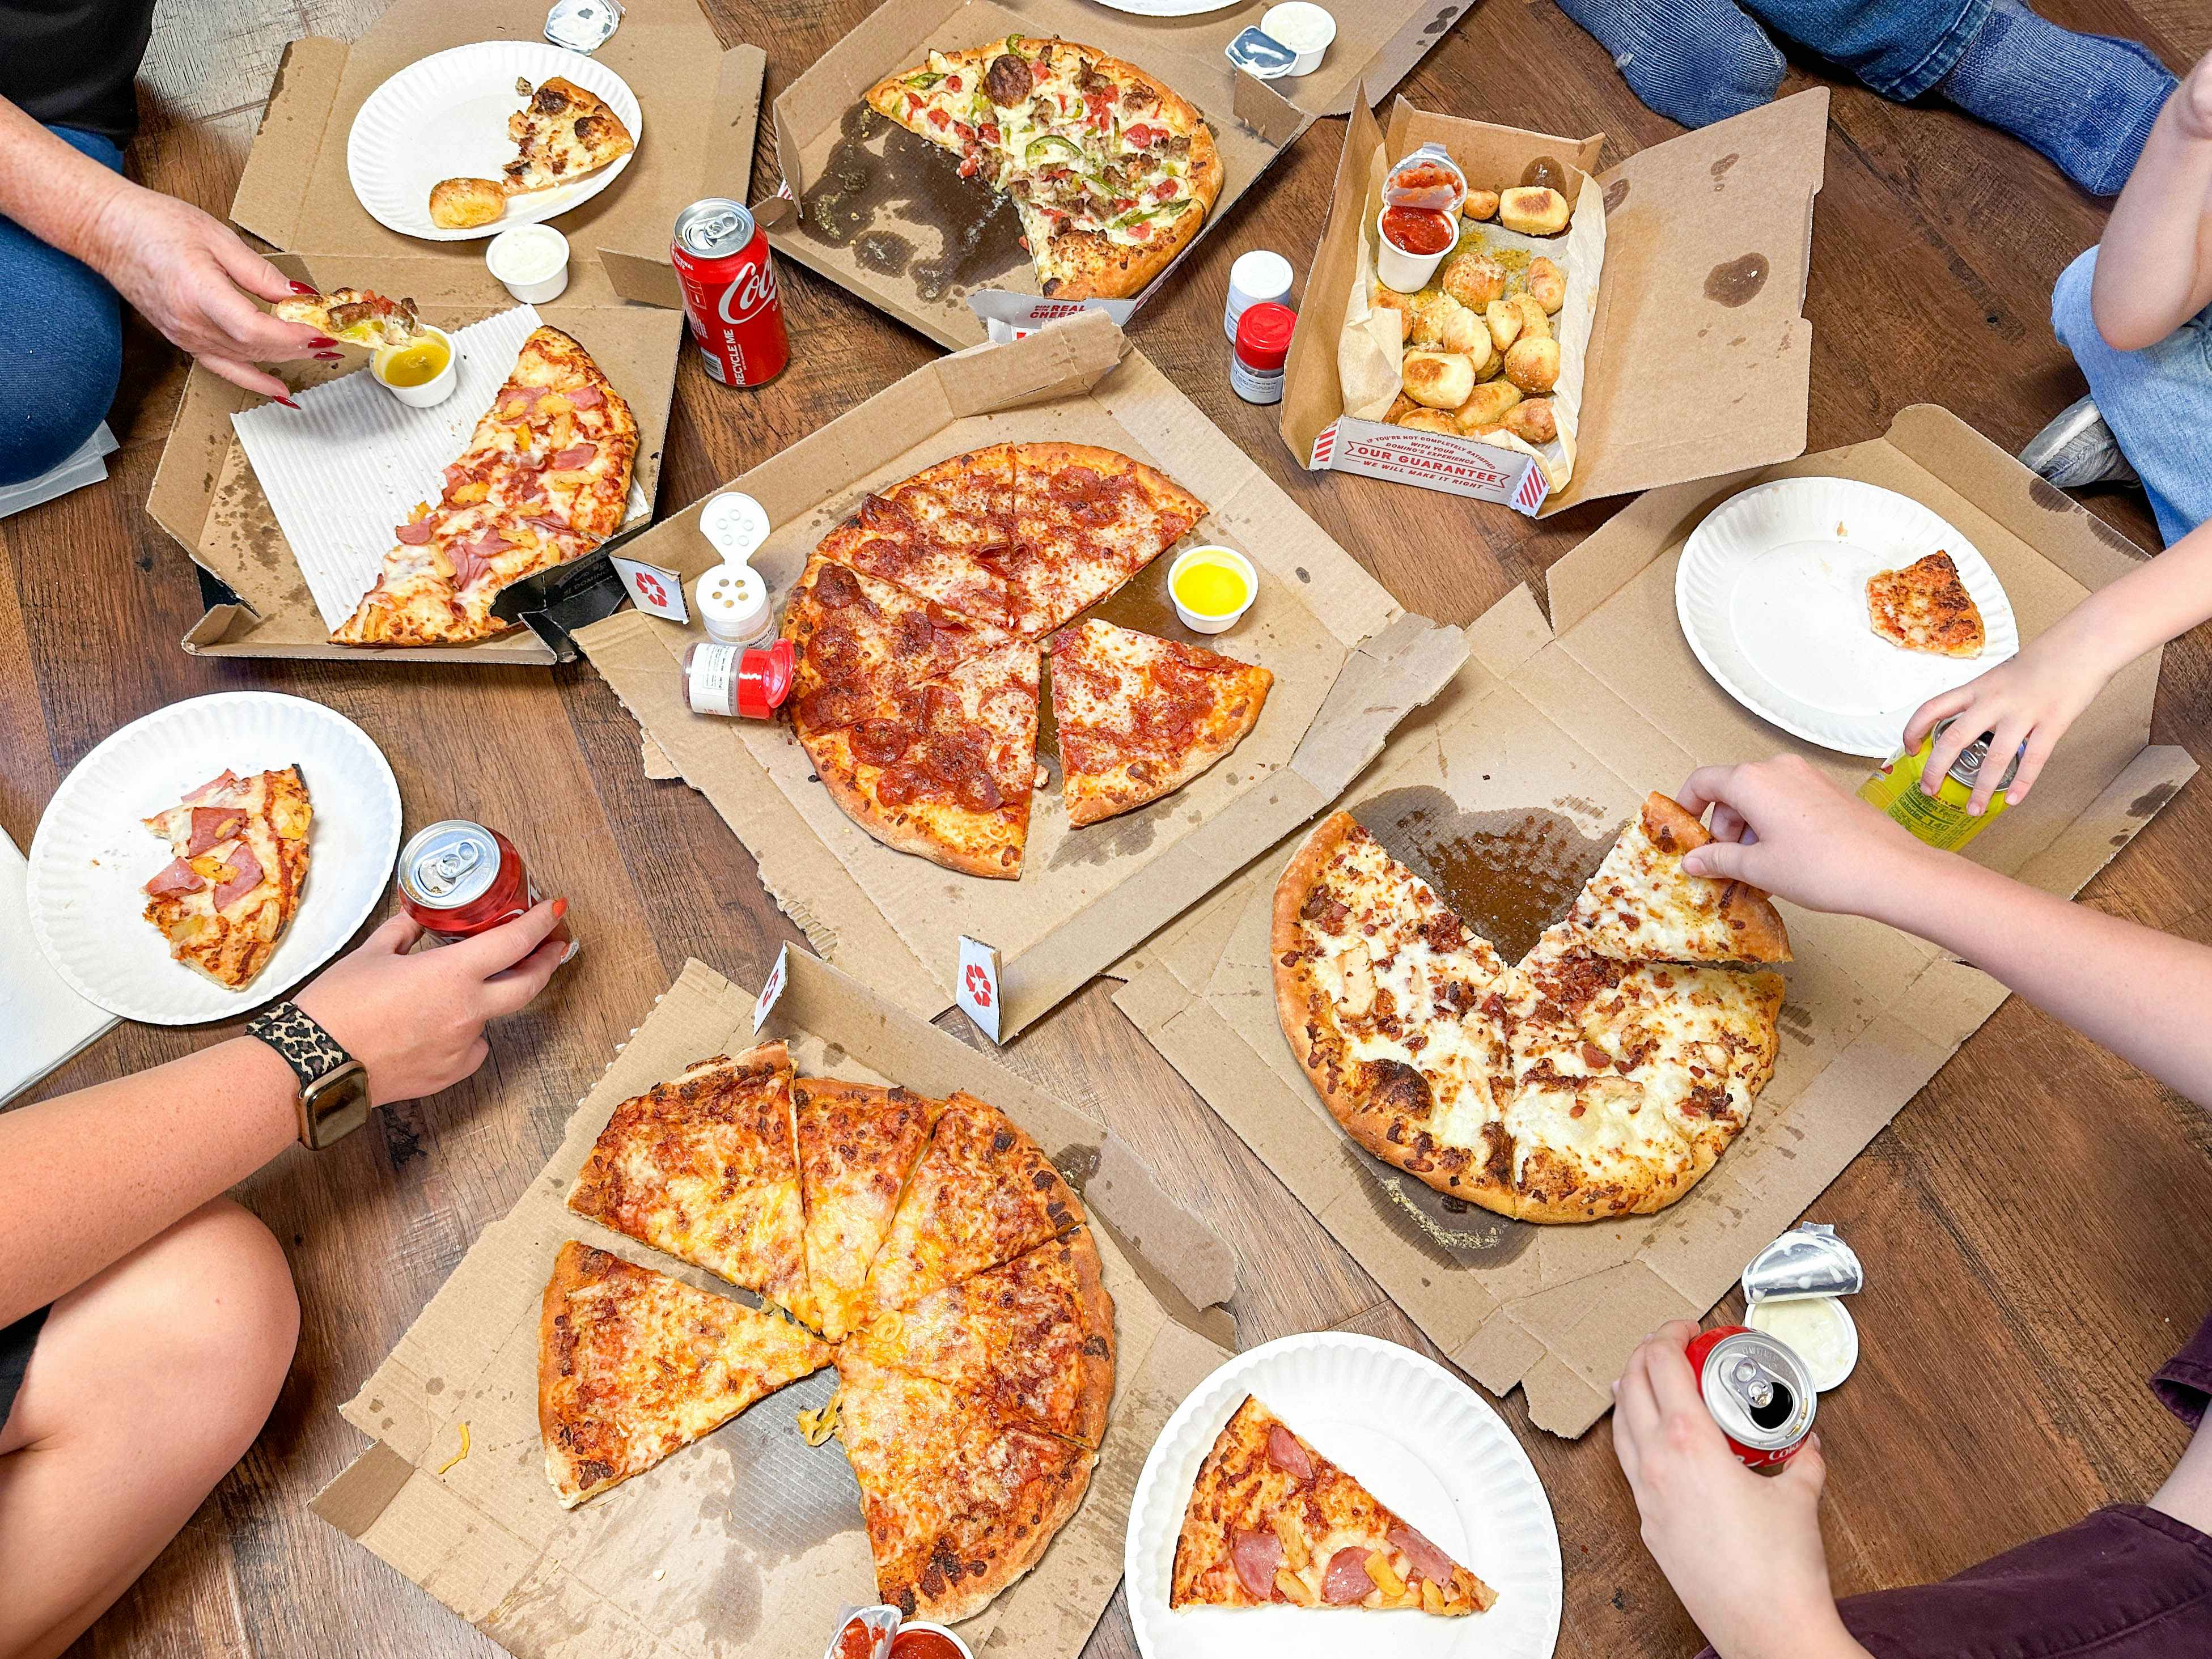 a large pizza dinner with drinks and plates on the floor